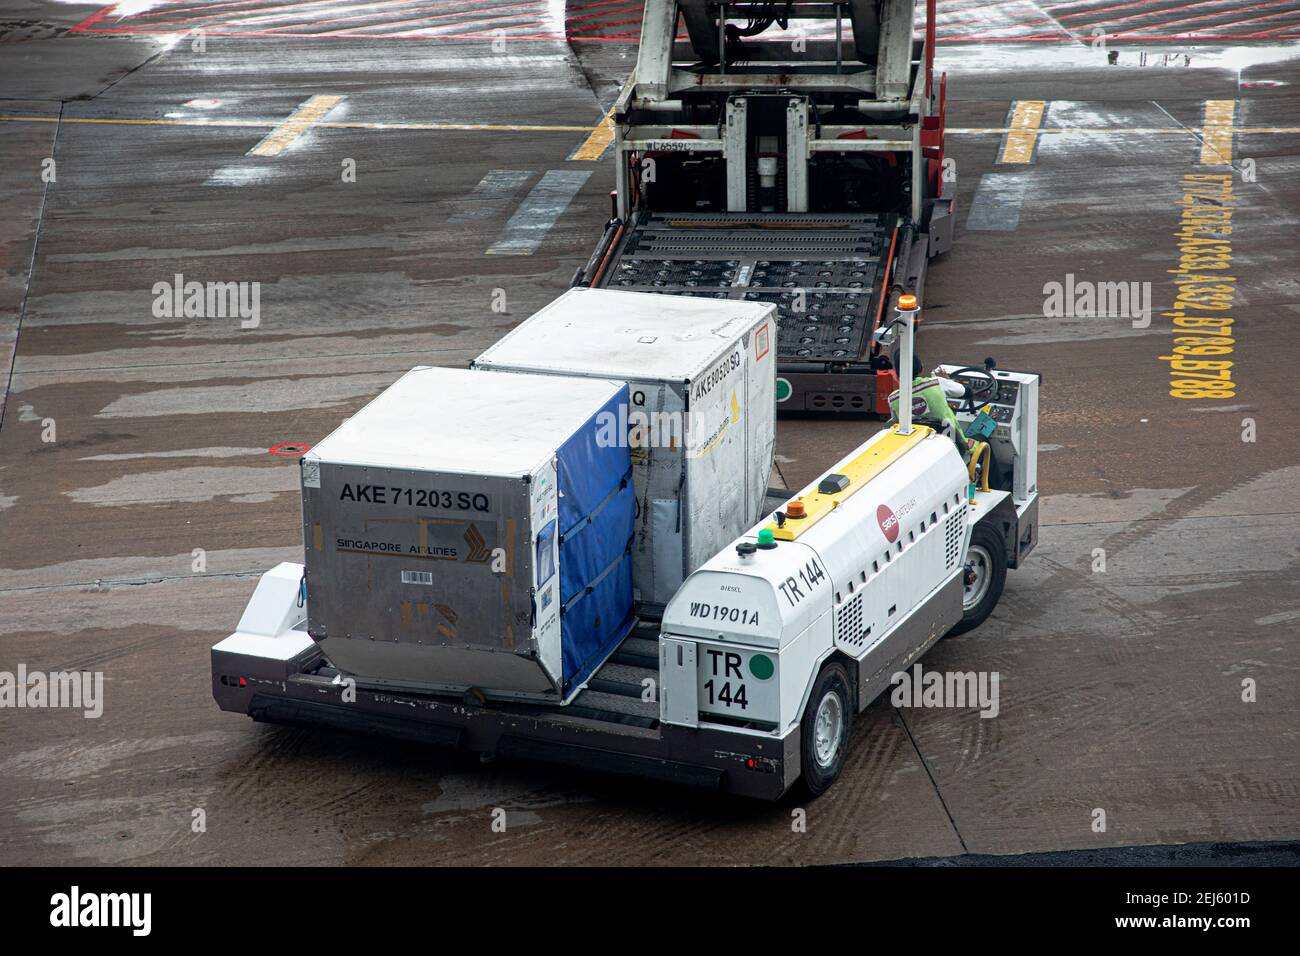 A container transporter for aircraft cargo Unit Load Devices at Singapore International Airport Stock Photo